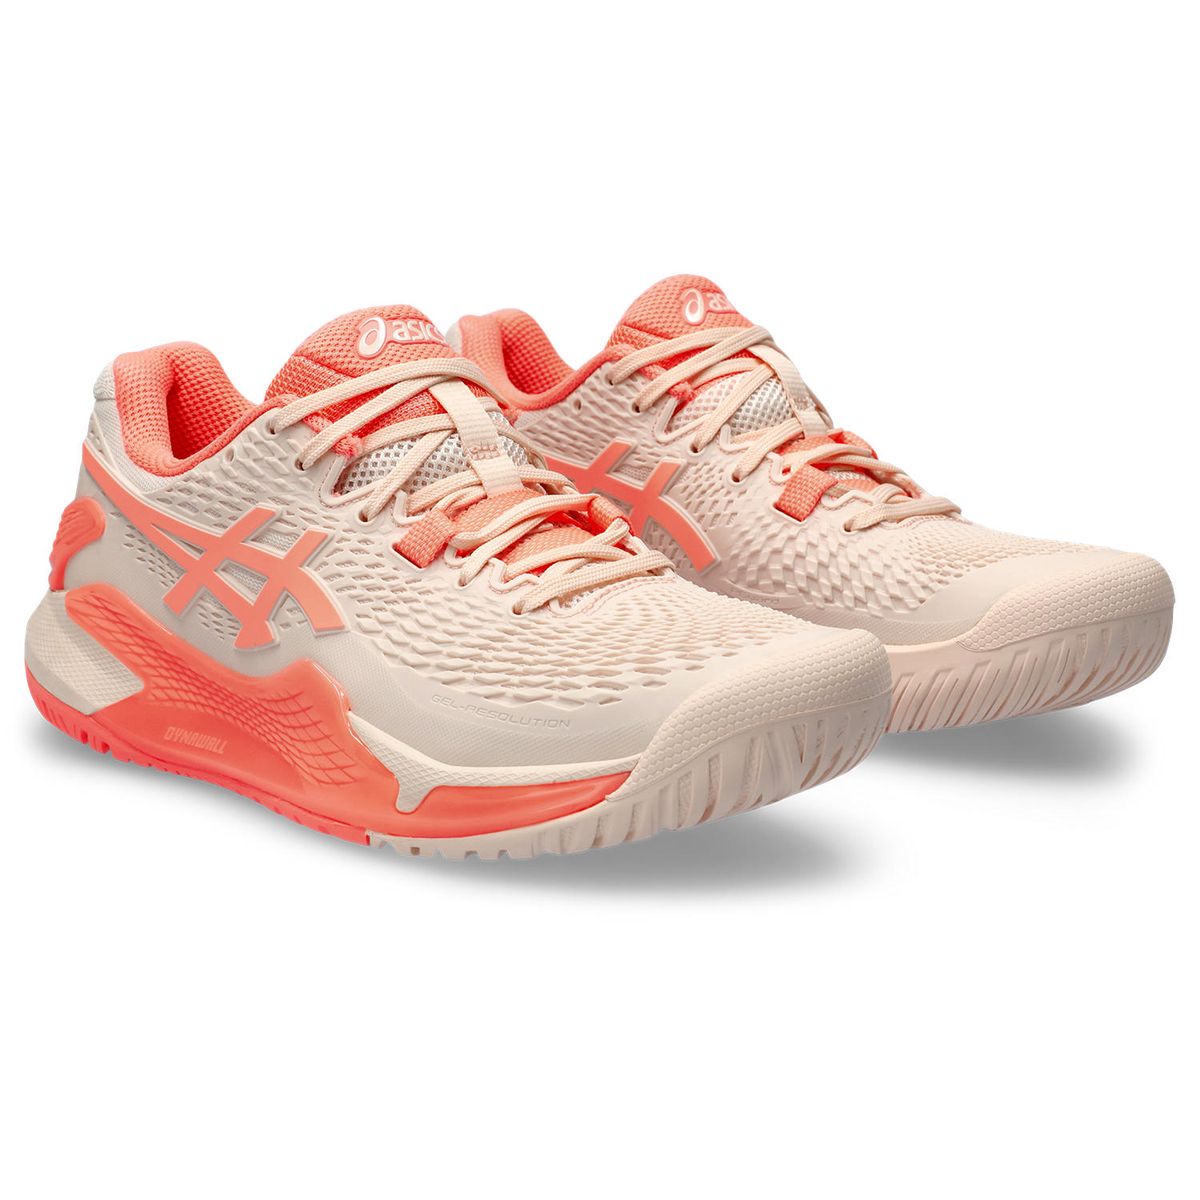 Asics Women's Gel-Resolution 9 Tennis Shoes - Pearl Pink/Sun Coral ...